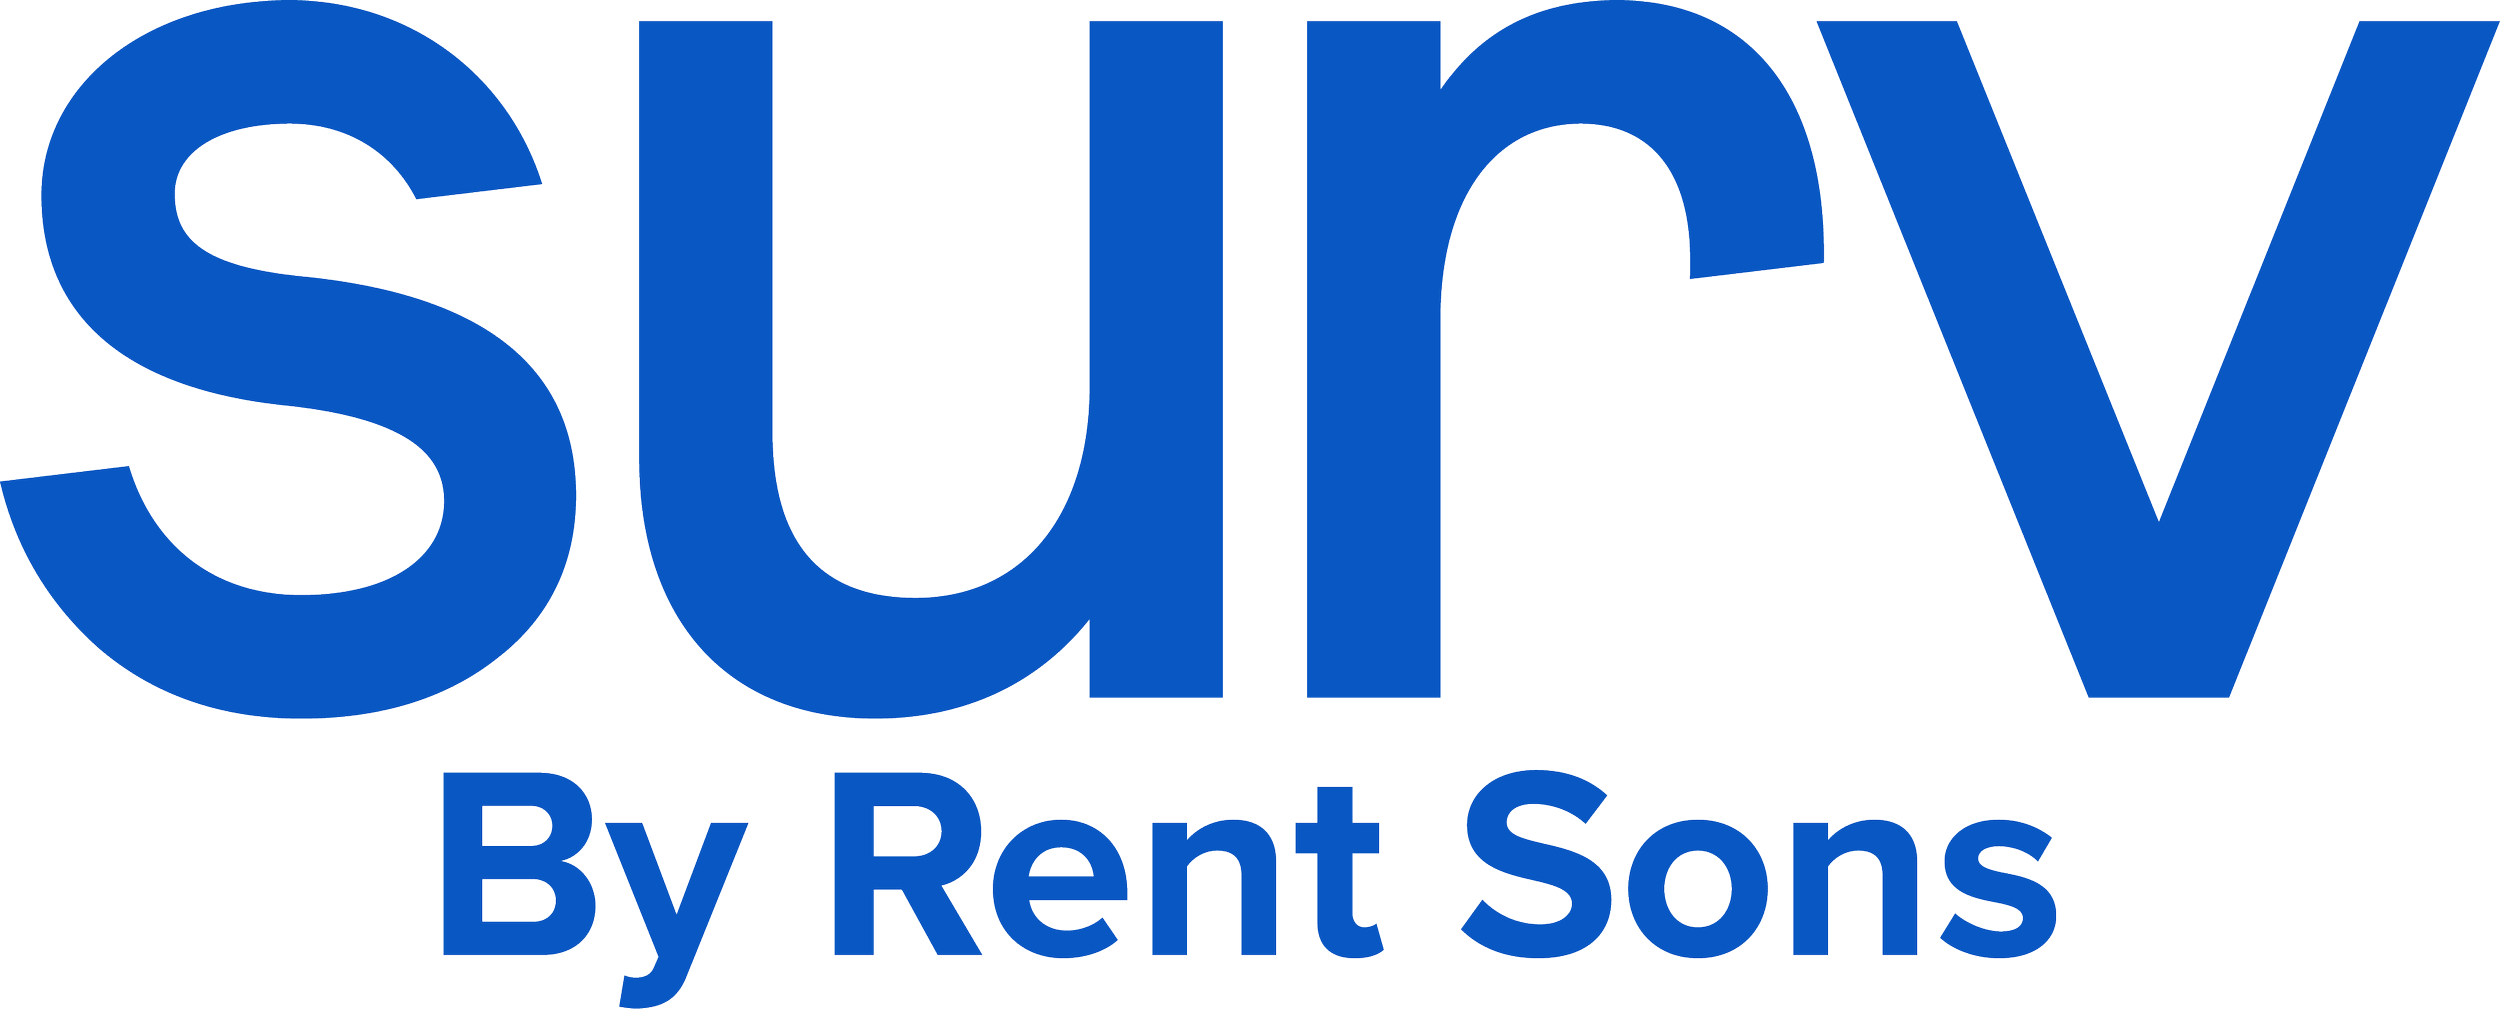 Surv-by-Rent-Sons Logo.png